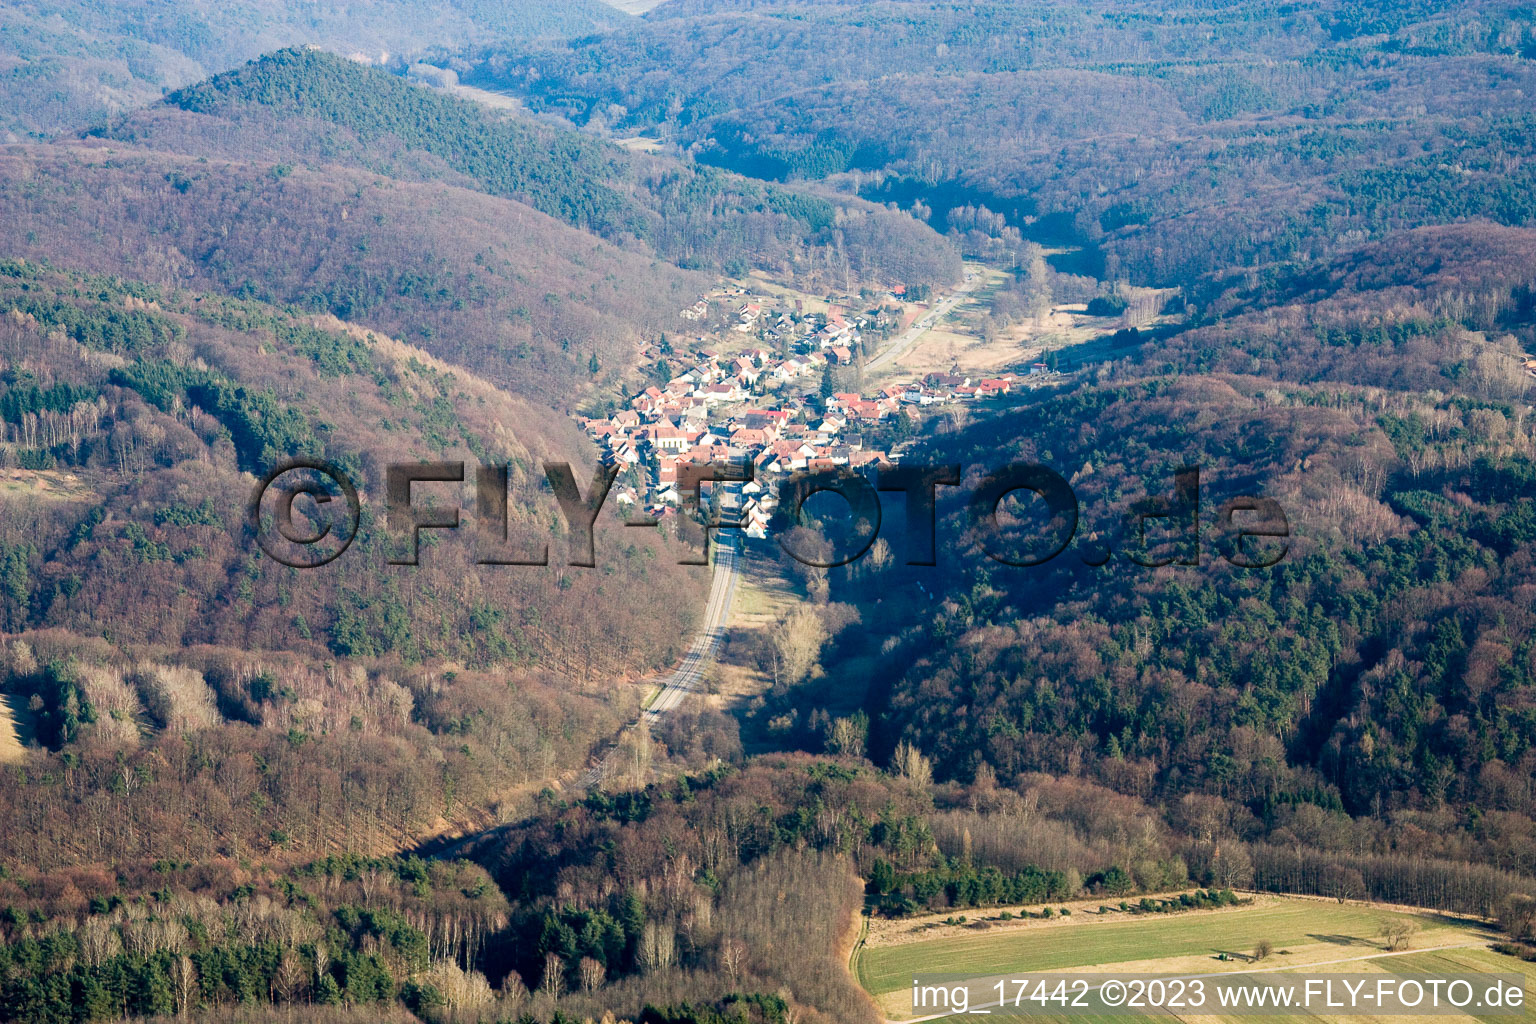 Waldrohrbach in the state Rhineland-Palatinate, Germany seen from above